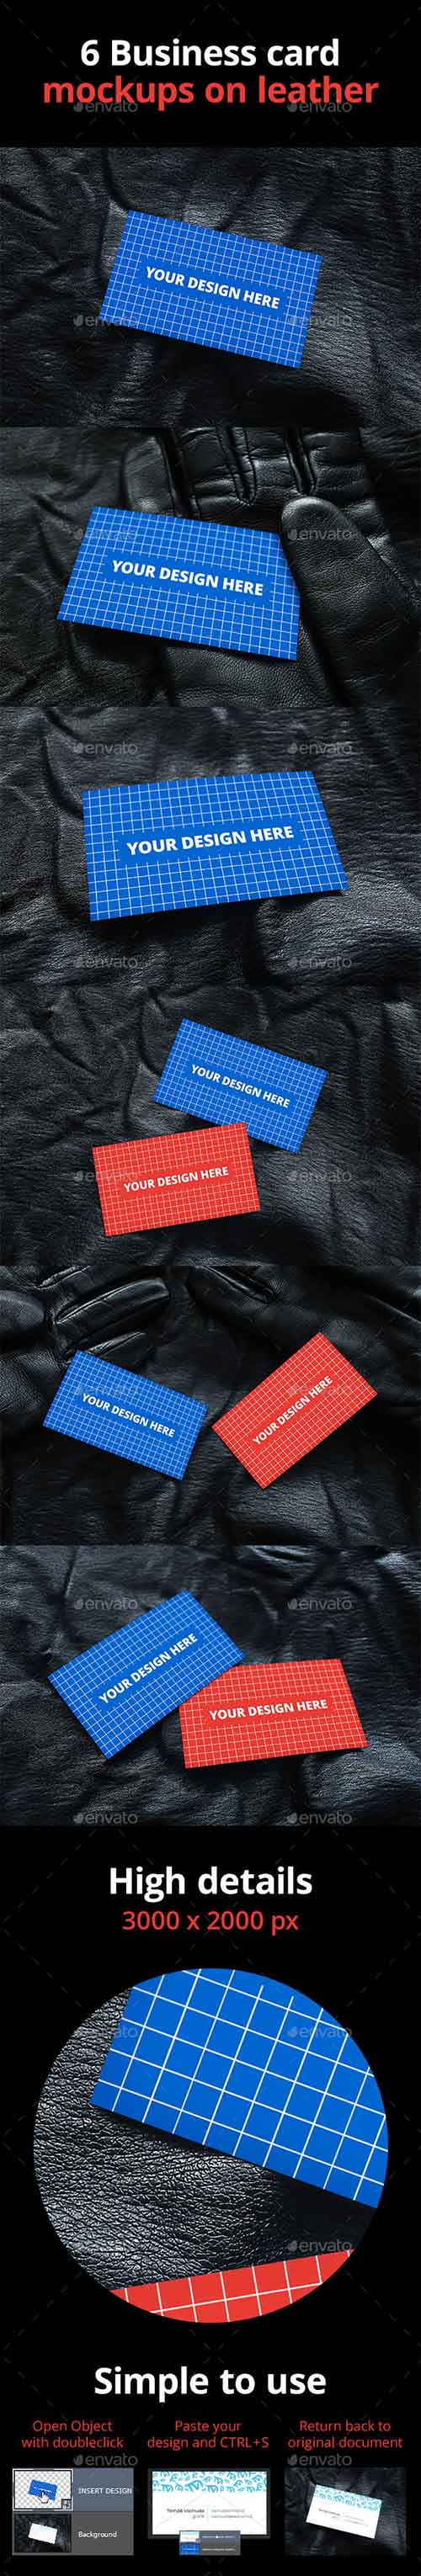 GraphicRiver - 6 Business Card Mockups on Leather - 11100322